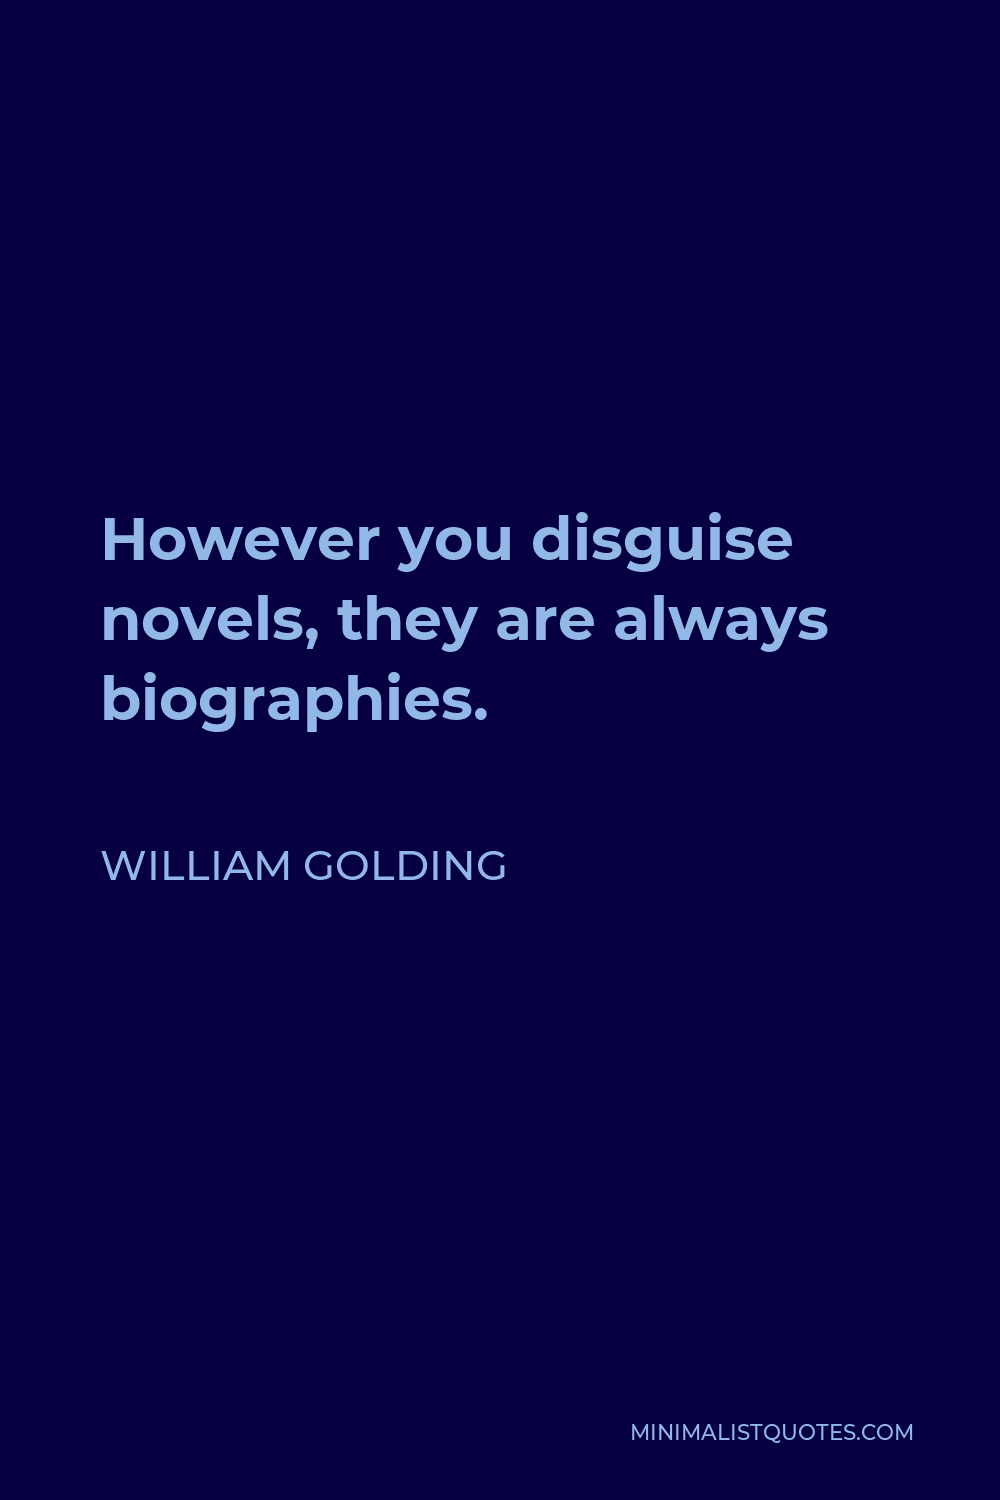 William Golding Quote - However you disguise novels, they are always biographies.